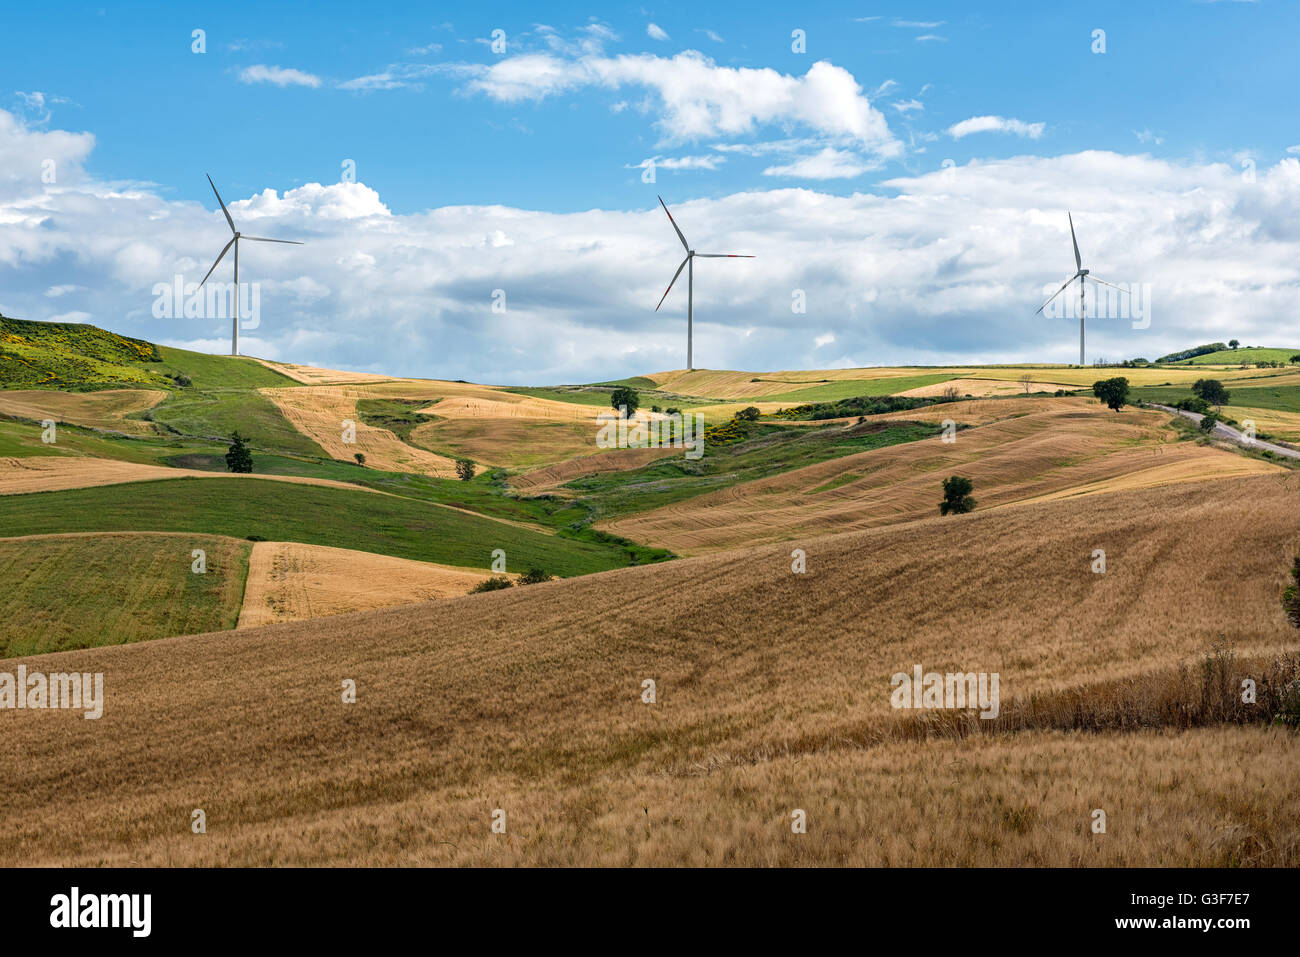 Row of wind turbines in a wind farm on the hilltops viewed across rolling agricultural land in a concept of alternative power an Stock Photo